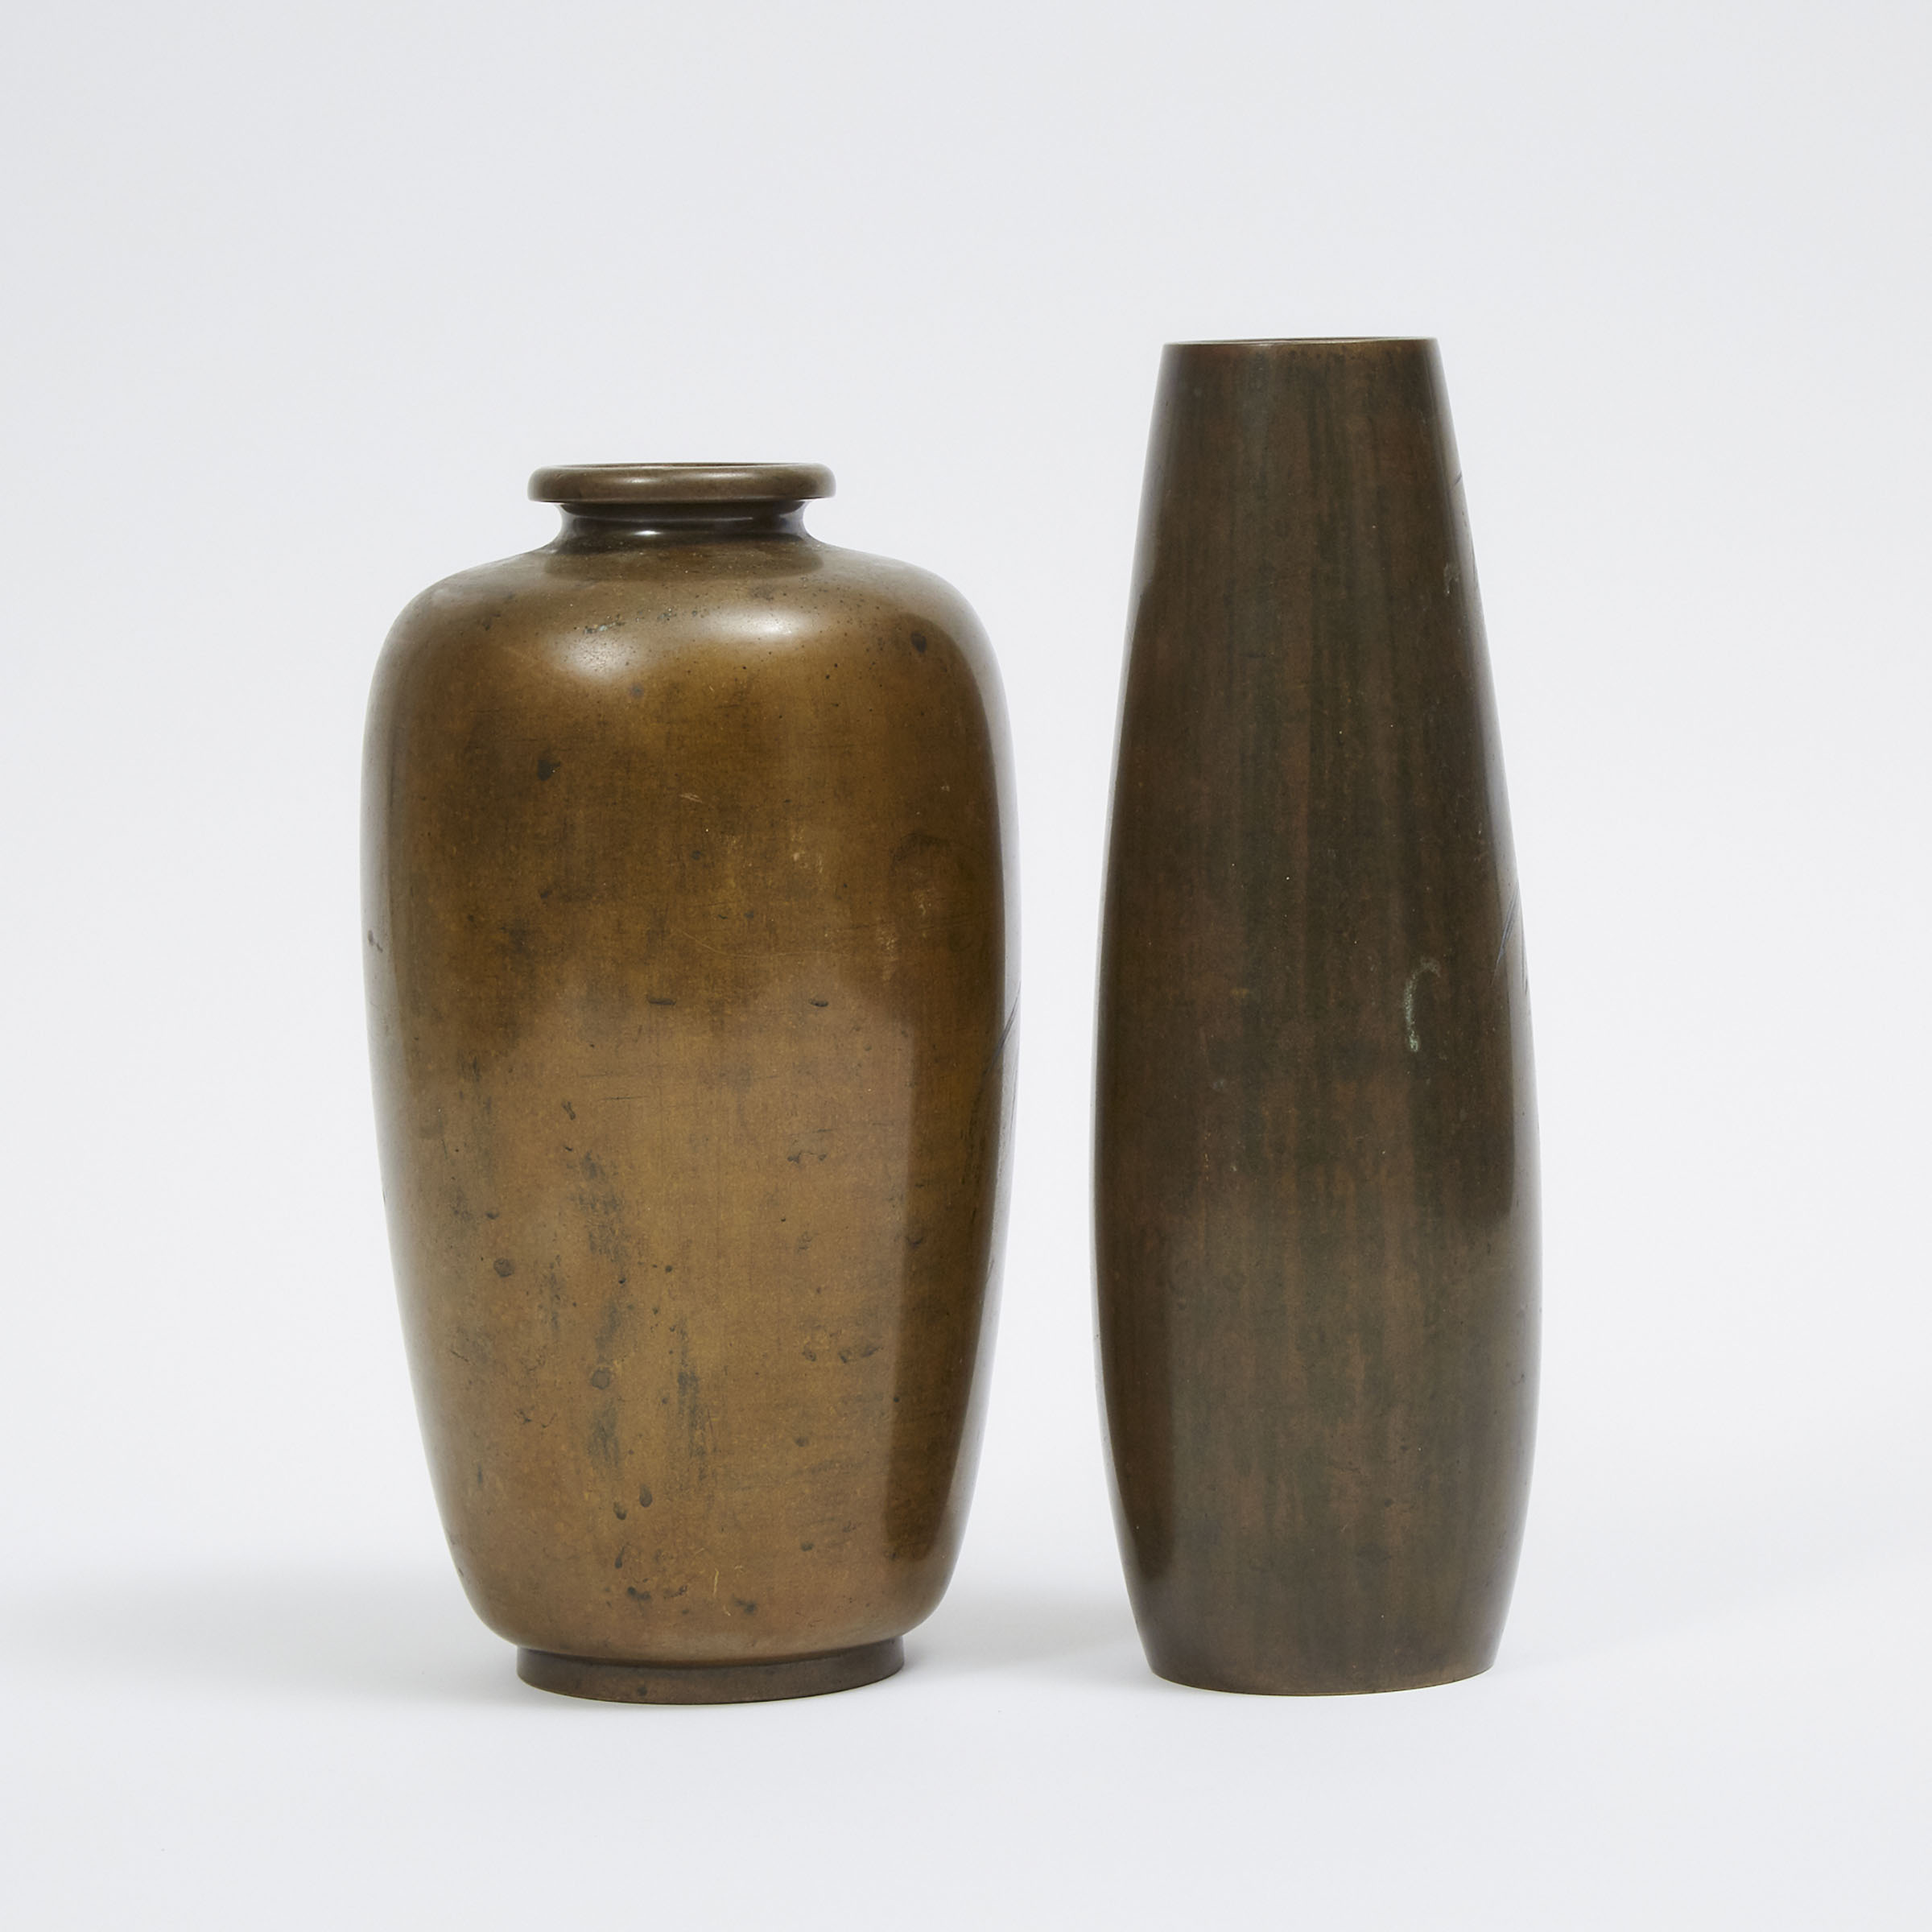 Two Japanese Gold and Silver Inlaid Vases, Miyamoto Mark, Meiji Period